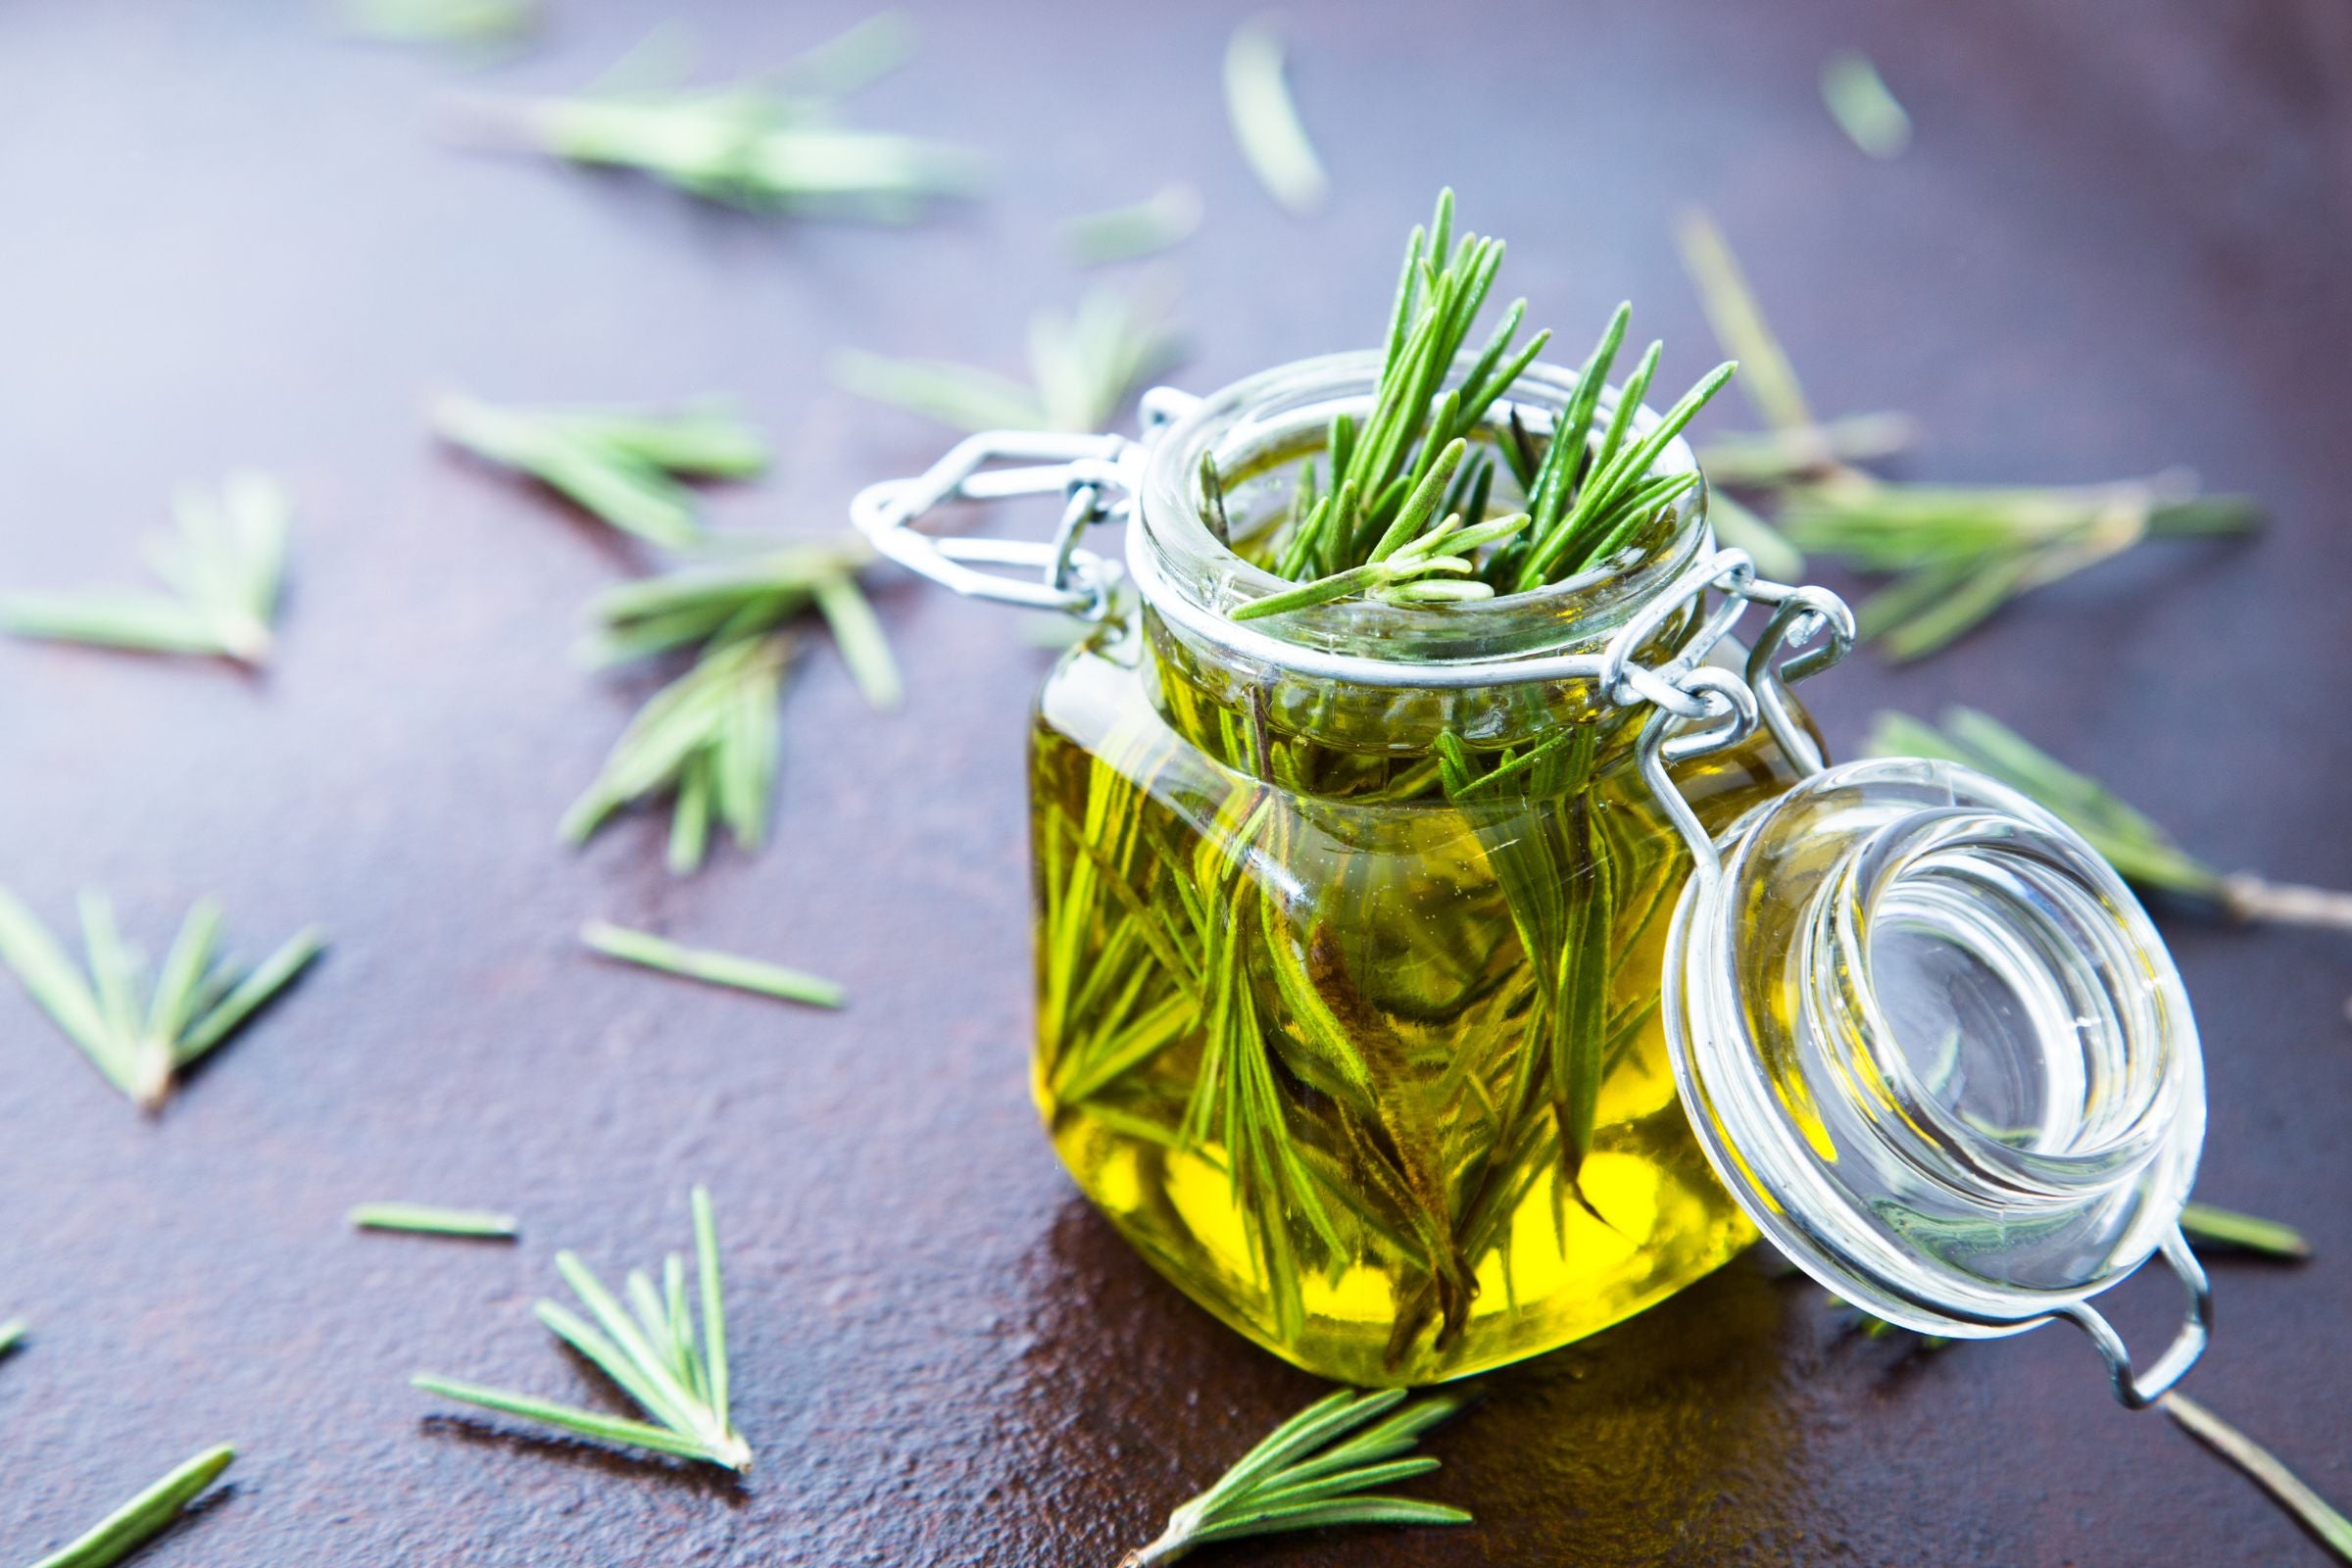 Cover Photo - 100_ Pure How To Make Rosemary Oil For Hair Growth.jpg